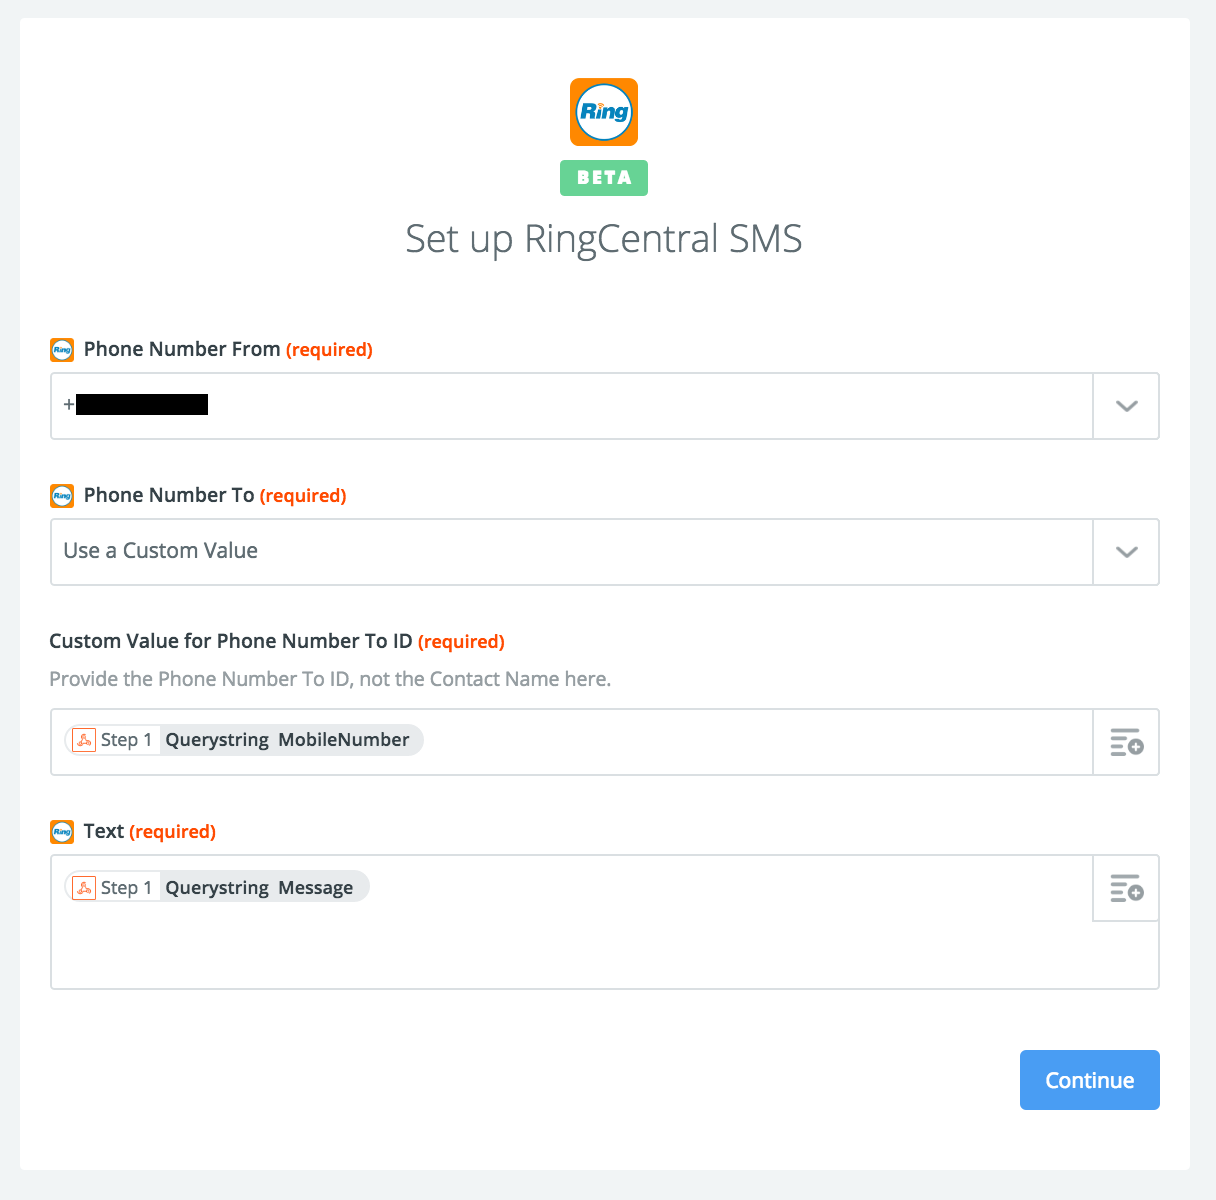 Formatting the RingCentral API Call